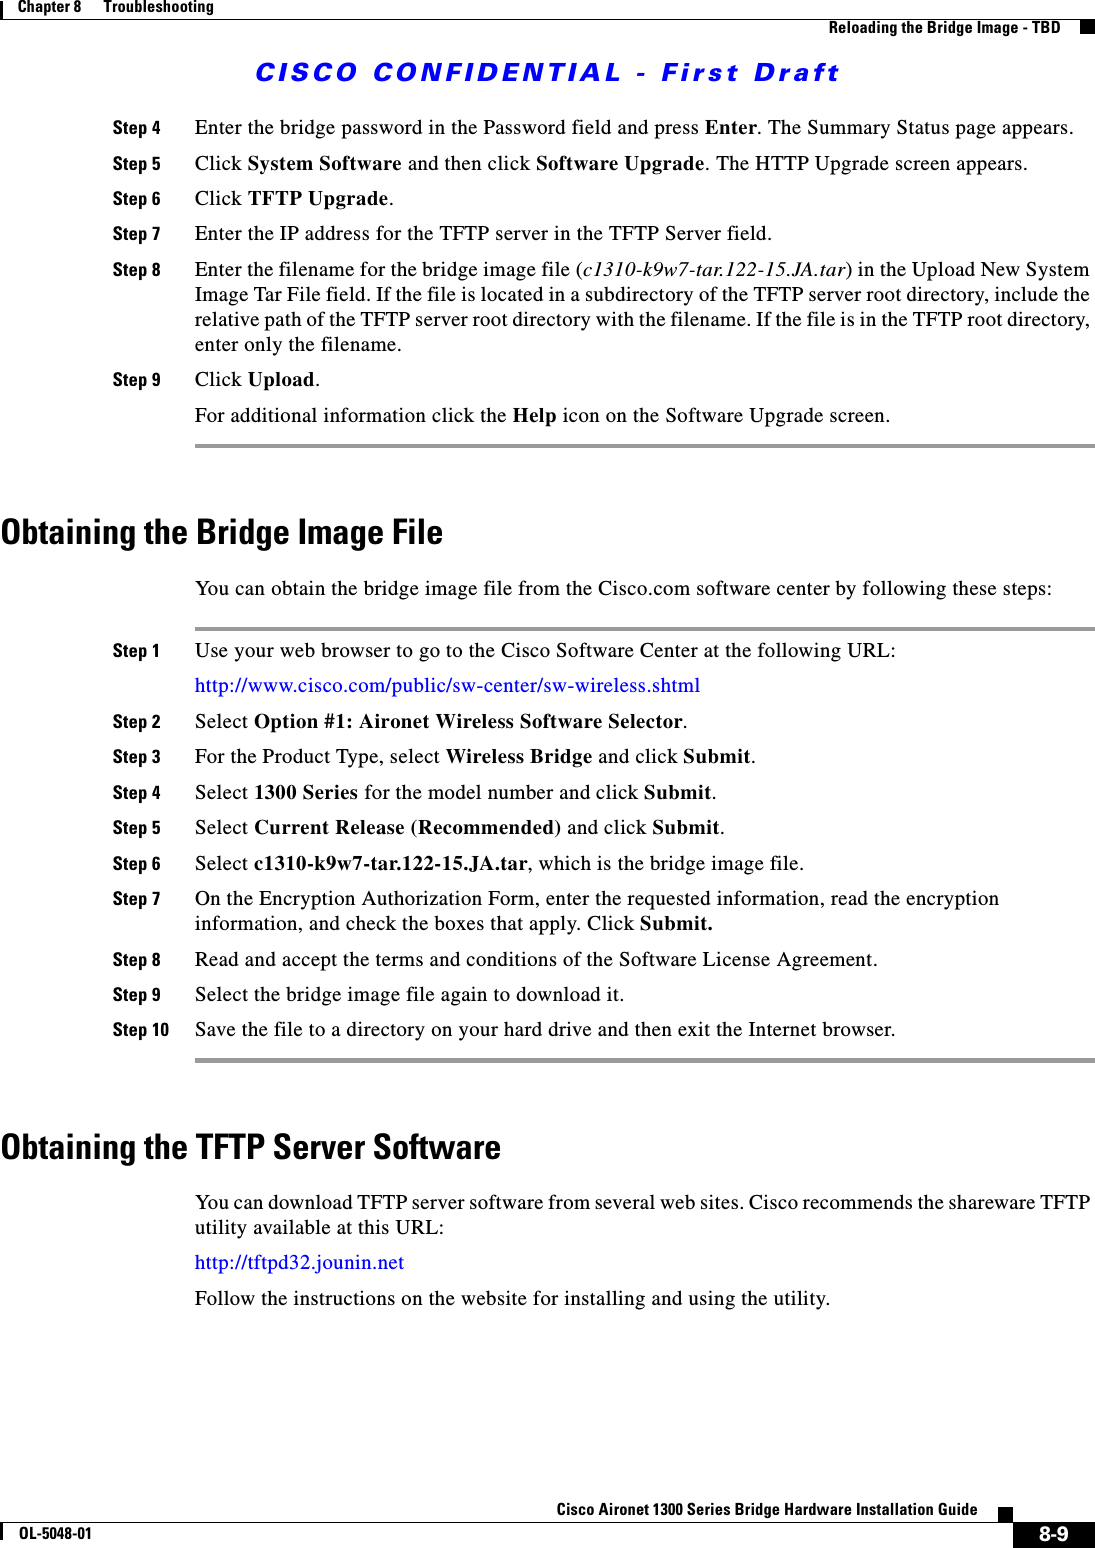 CISCO CONFIDENTIAL - First Draft8-9Cisco Aironet 1300 Series Bridge Hardware Installation GuideOL-5048-01Chapter 8      TroubleshootingReloading the Bridge Image - TBDStep 4 Enter the bridge password in the Password field and press Enter. The Summary Status page appears.Step 5 Click System Software and then click Software Upgrade. The HTTP Upgrade screen appears.Step 6 Click TFTP Upgrade. Step 7 Enter the IP address for the TFTP server in the TFTP Server field.Step 8 Enter the filename for the bridge image file (c1310-k9w7-tar.122-15.JA.tar) in the Upload New System Image Tar File field. If the file is located in a subdirectory of the TFTP server root directory, include the relative path of the TFTP server root directory with the filename. If the file is in the TFTP root directory, enter only the filename.Step 9 Click Upload.For additional information click the Help icon on the Software Upgrade screen. Obtaining the Bridge Image FileYou can obtain the bridge image file from the Cisco.com software center by following these steps:Step 1 Use your web browser to go to the Cisco Software Center at the following URL:http://www.cisco.com/public/sw-center/sw-wireless.shtml Step 2 Select Option #1: Aironet Wireless Software Selector.Step 3 For the Product Type, select Wireless Bridge and click Submit.Step 4 Select 1300 Series for the model number and click Submit.Step 5 Select Current Release (Recommended) and click Submit.Step 6 Select c1310-k9w7-tar.122-15.JA.tar, which is the bridge image file.Step 7 On the Encryption Authorization Form, enter the requested information, read the encryption information, and check the boxes that apply. Click Submit.Step 8 Read and accept the terms and conditions of the Software License Agreement. Step 9 Select the bridge image file again to download it.Step 10 Save the file to a directory on your hard drive and then exit the Internet browser. Obtaining the TFTP Server SoftwareYou can download TFTP server software from several web sites. Cisco recommends the shareware TFTP utility available at this URL:http://tftpd32.jounin.netFollow the instructions on the website for installing and using the utility.